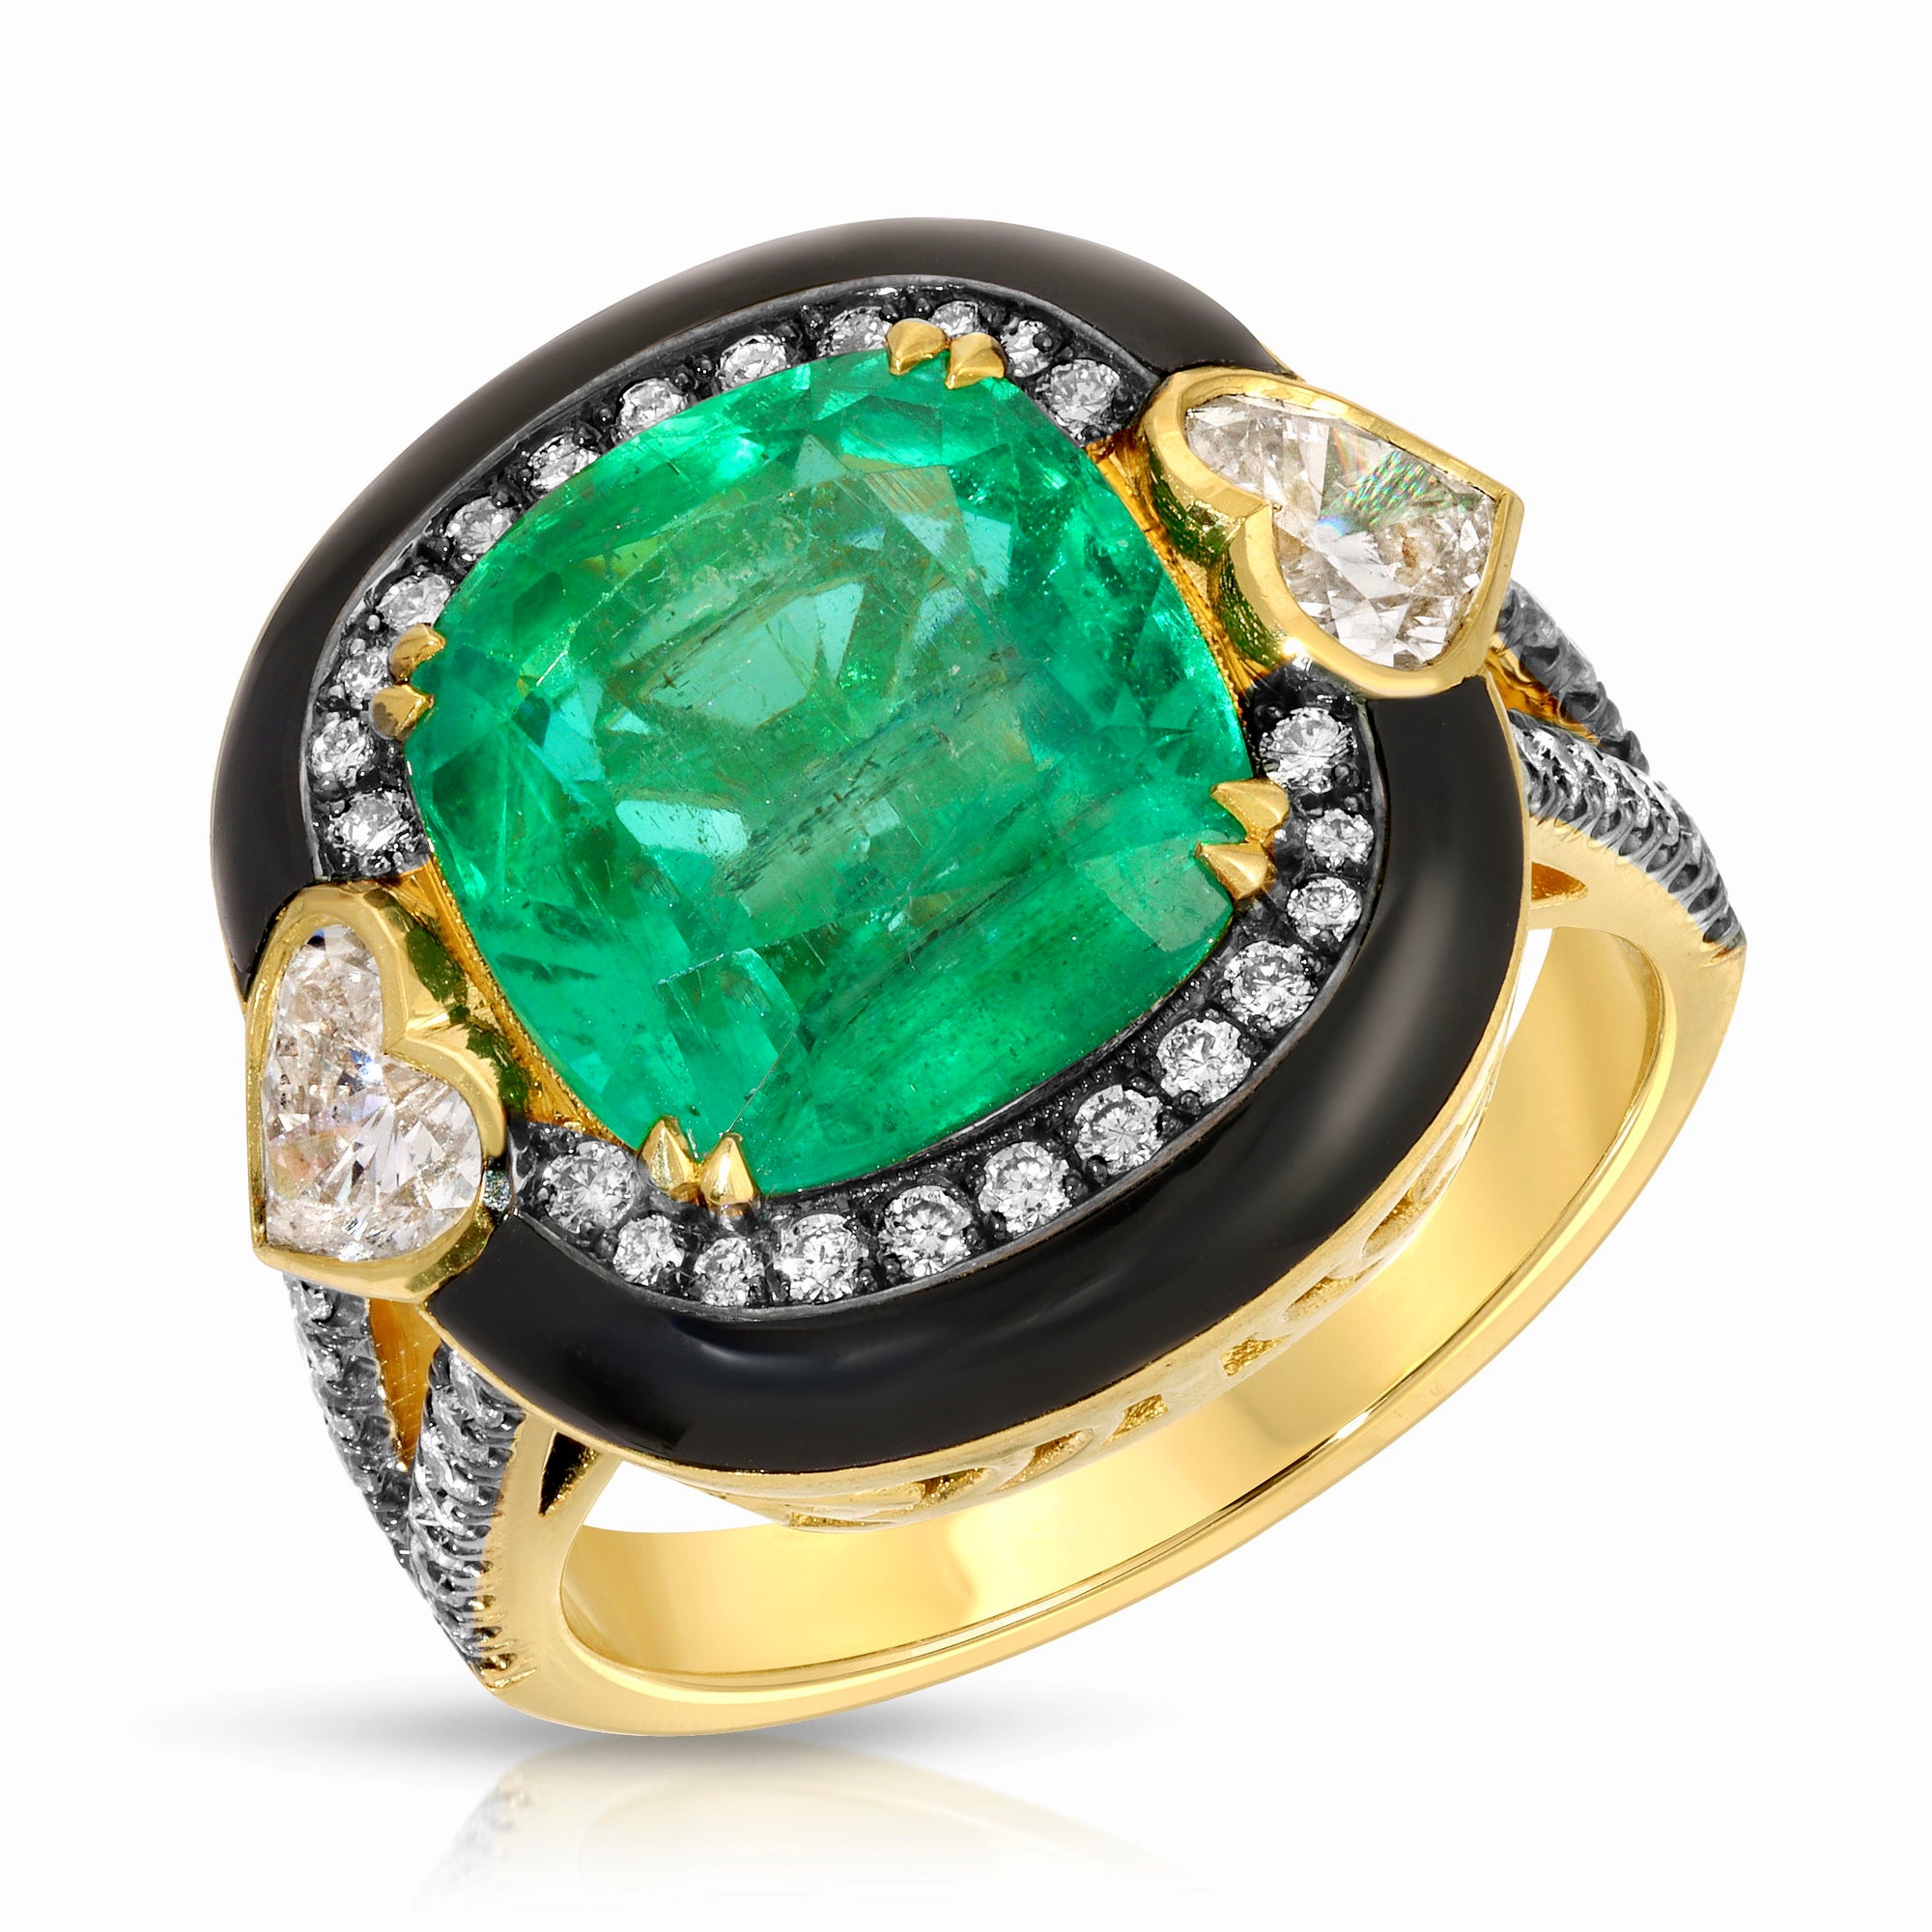 Emerald Queen Ring by Lord Jewelry available at Talisman Collection Fine Jewelers in El Dorado Hills, CA and online. Presenting the Emerald Queen Ring— a majestic masterpiece that commands attention. Gracing the center is a resplendent 5.36 carat emerald, flanked by heart-shaped diamonds totaling .93 cts on either side, encircled by .47 cts of round diamonds. This regal beauty is crowned with a halo of bold black enamel, all elegantly set in 18k gold.